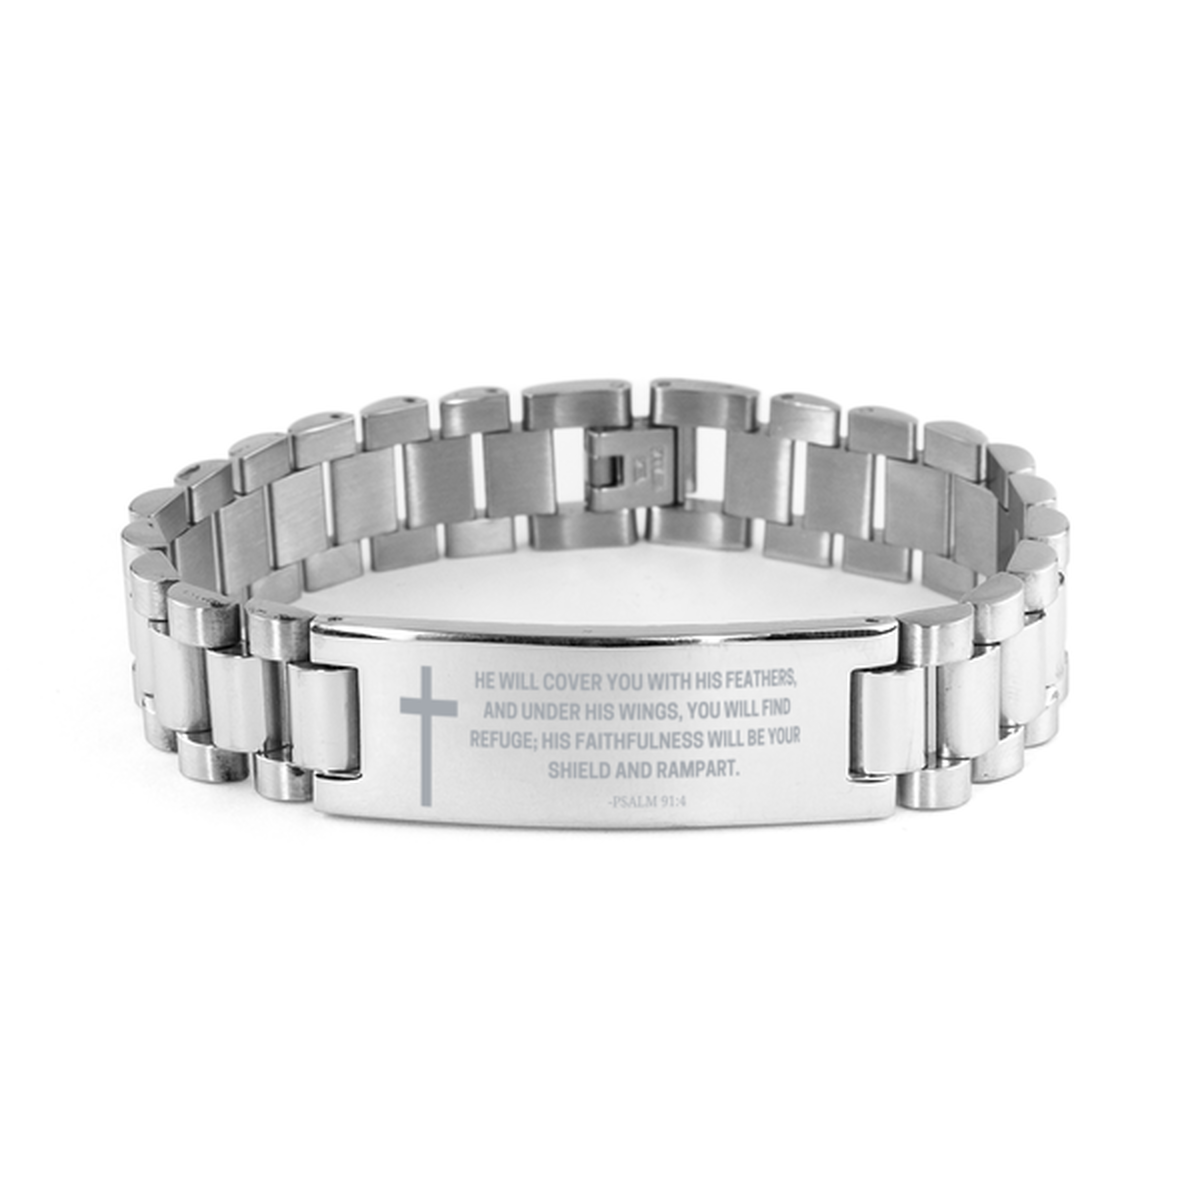 Baptism Gifts For Teenage Boys Girls, Christian Bible Verse Ladder Stainless Steel Bracelet, He will cover you with his feathers, Catholic Confirmation Gifts for Son, Godson, Grandson, Nephew